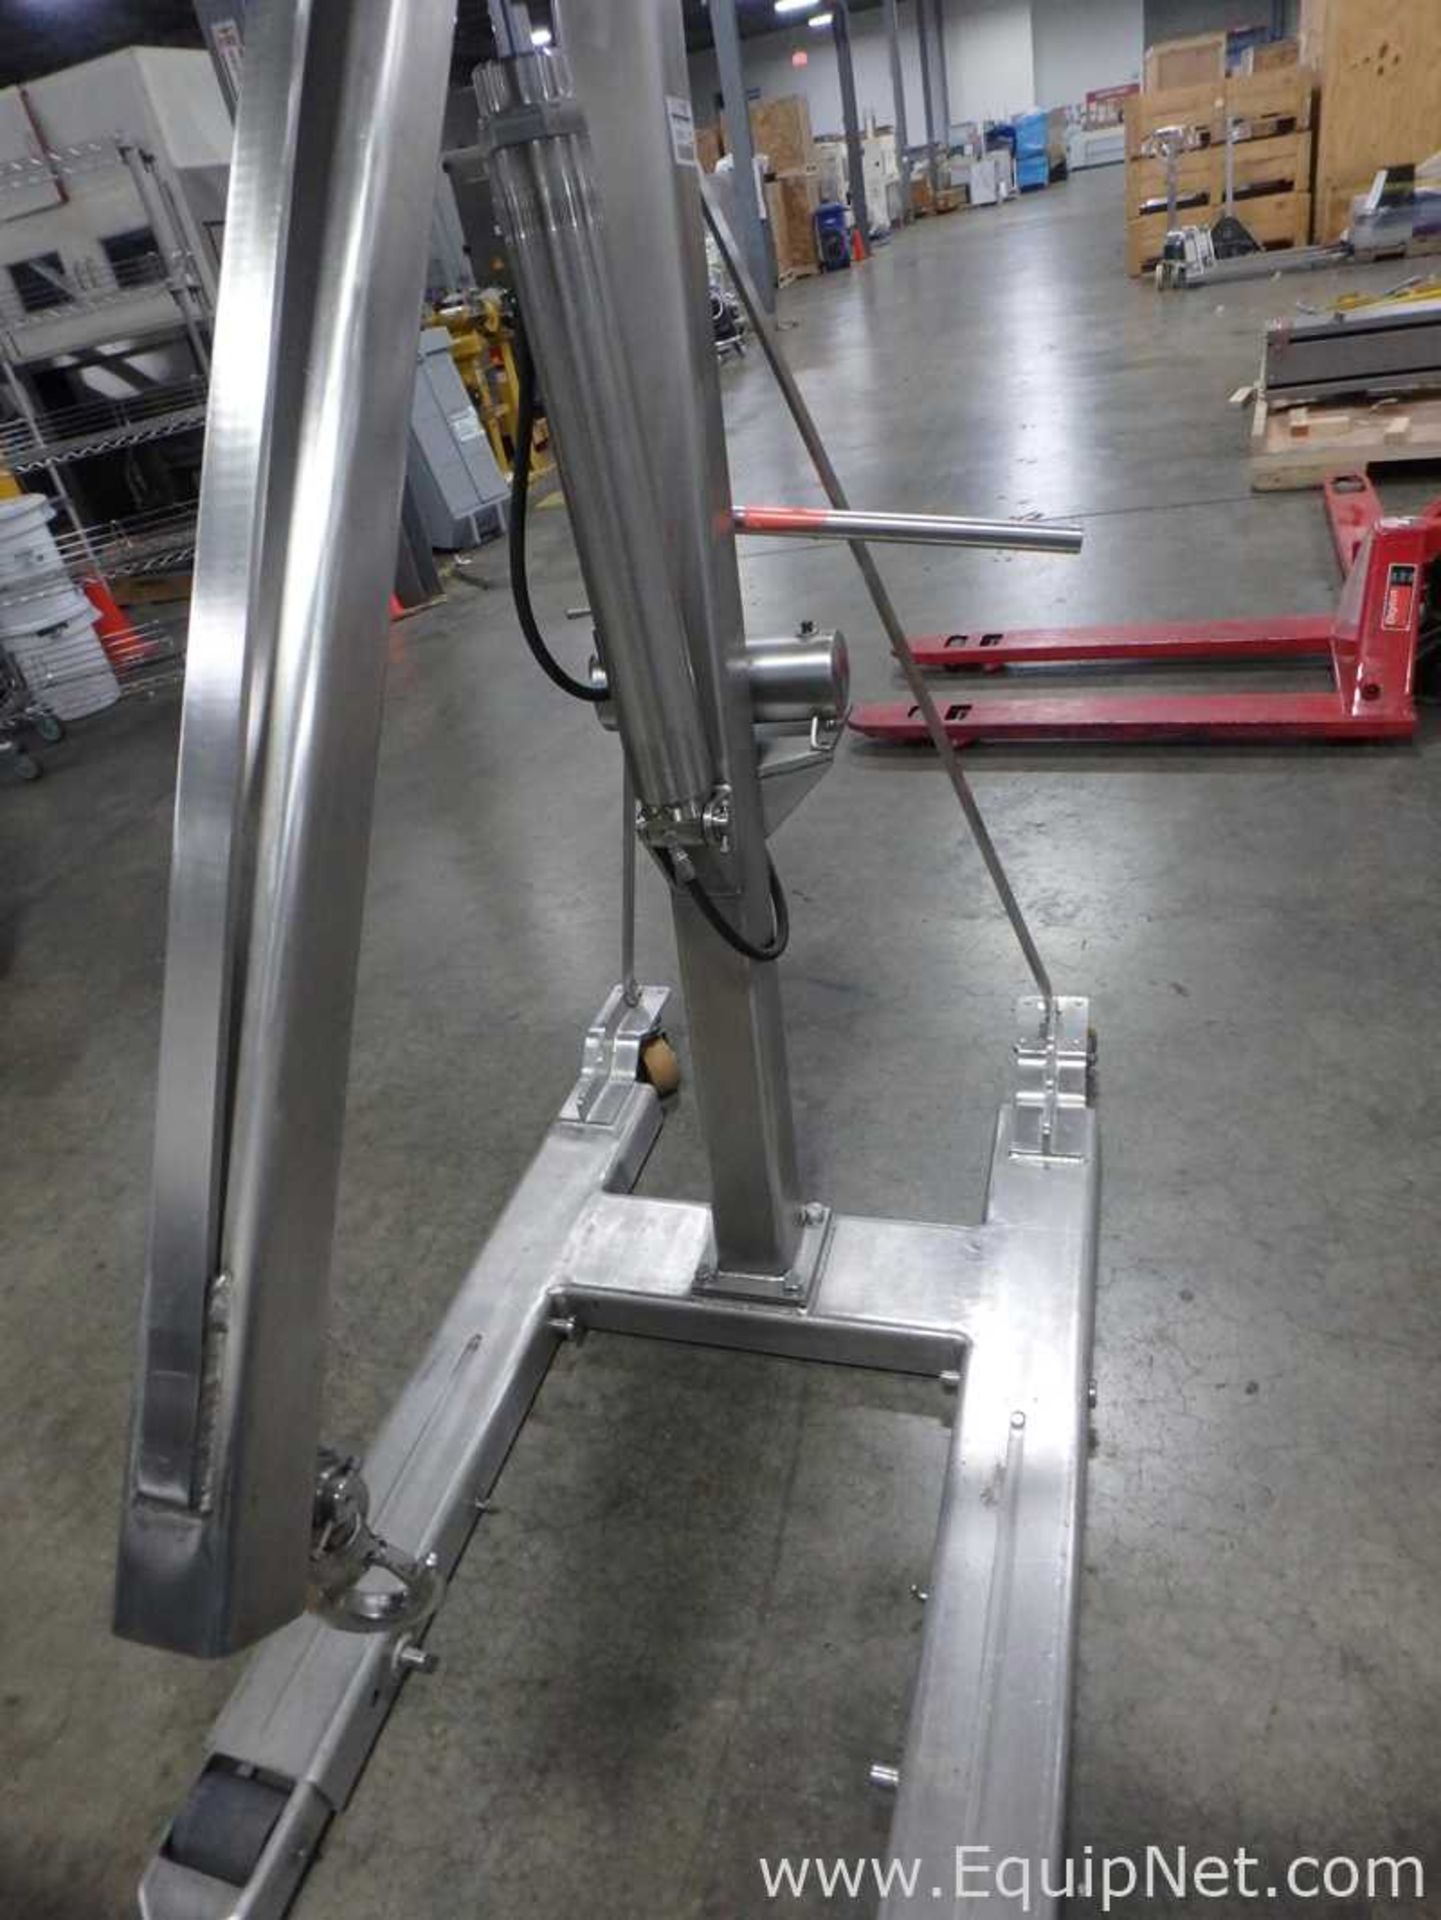 EQUIPNET LISTING #834846; REMOVAL COST: TBD; DESCRIPTION: Stainless Steel Hydraulic - Image 3 of 6